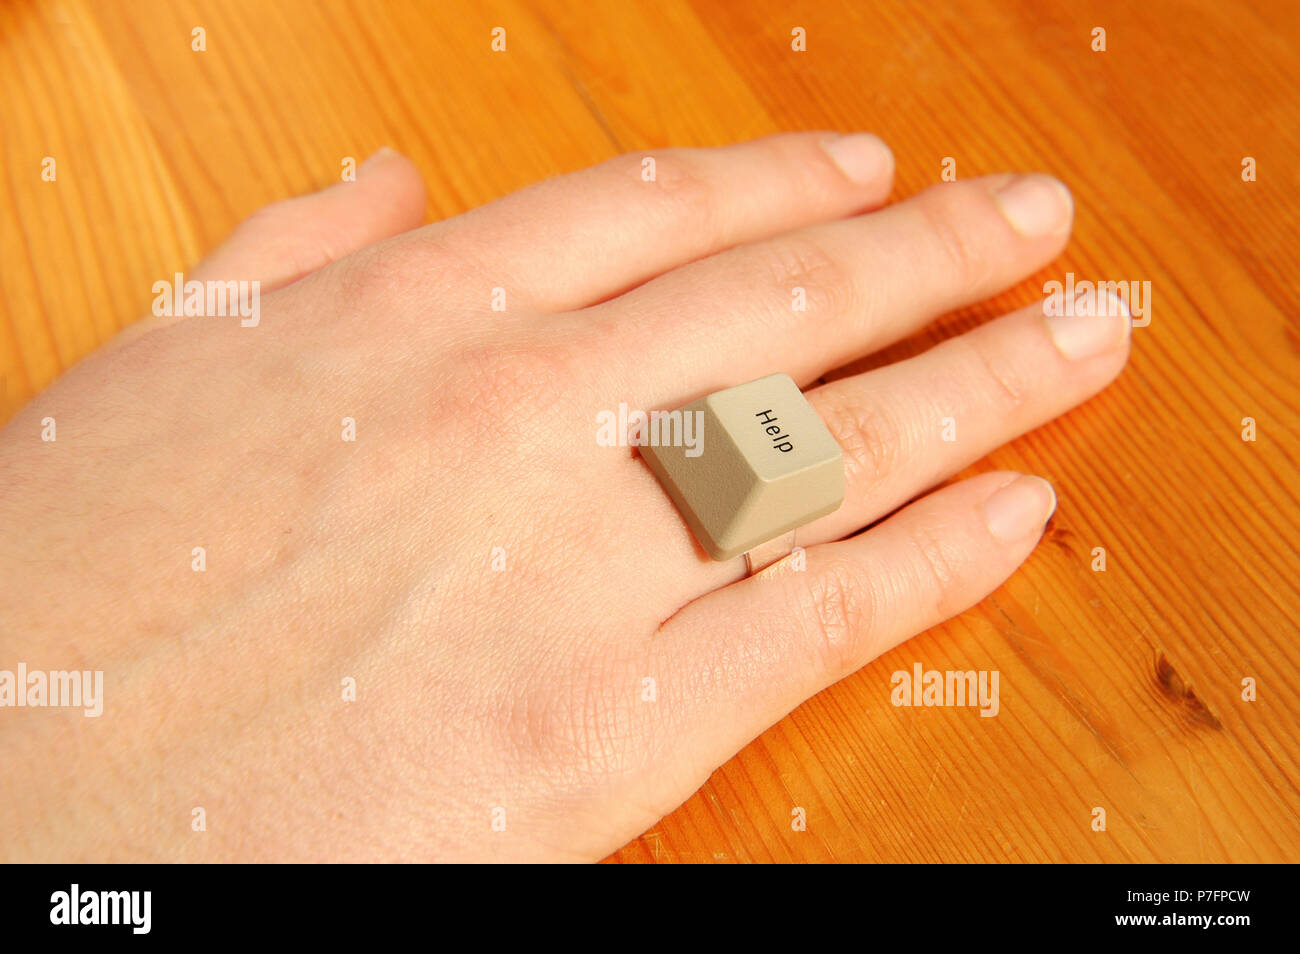 Needy, Hand with Help Ring from the computer keyboard, Germany Stock Photo